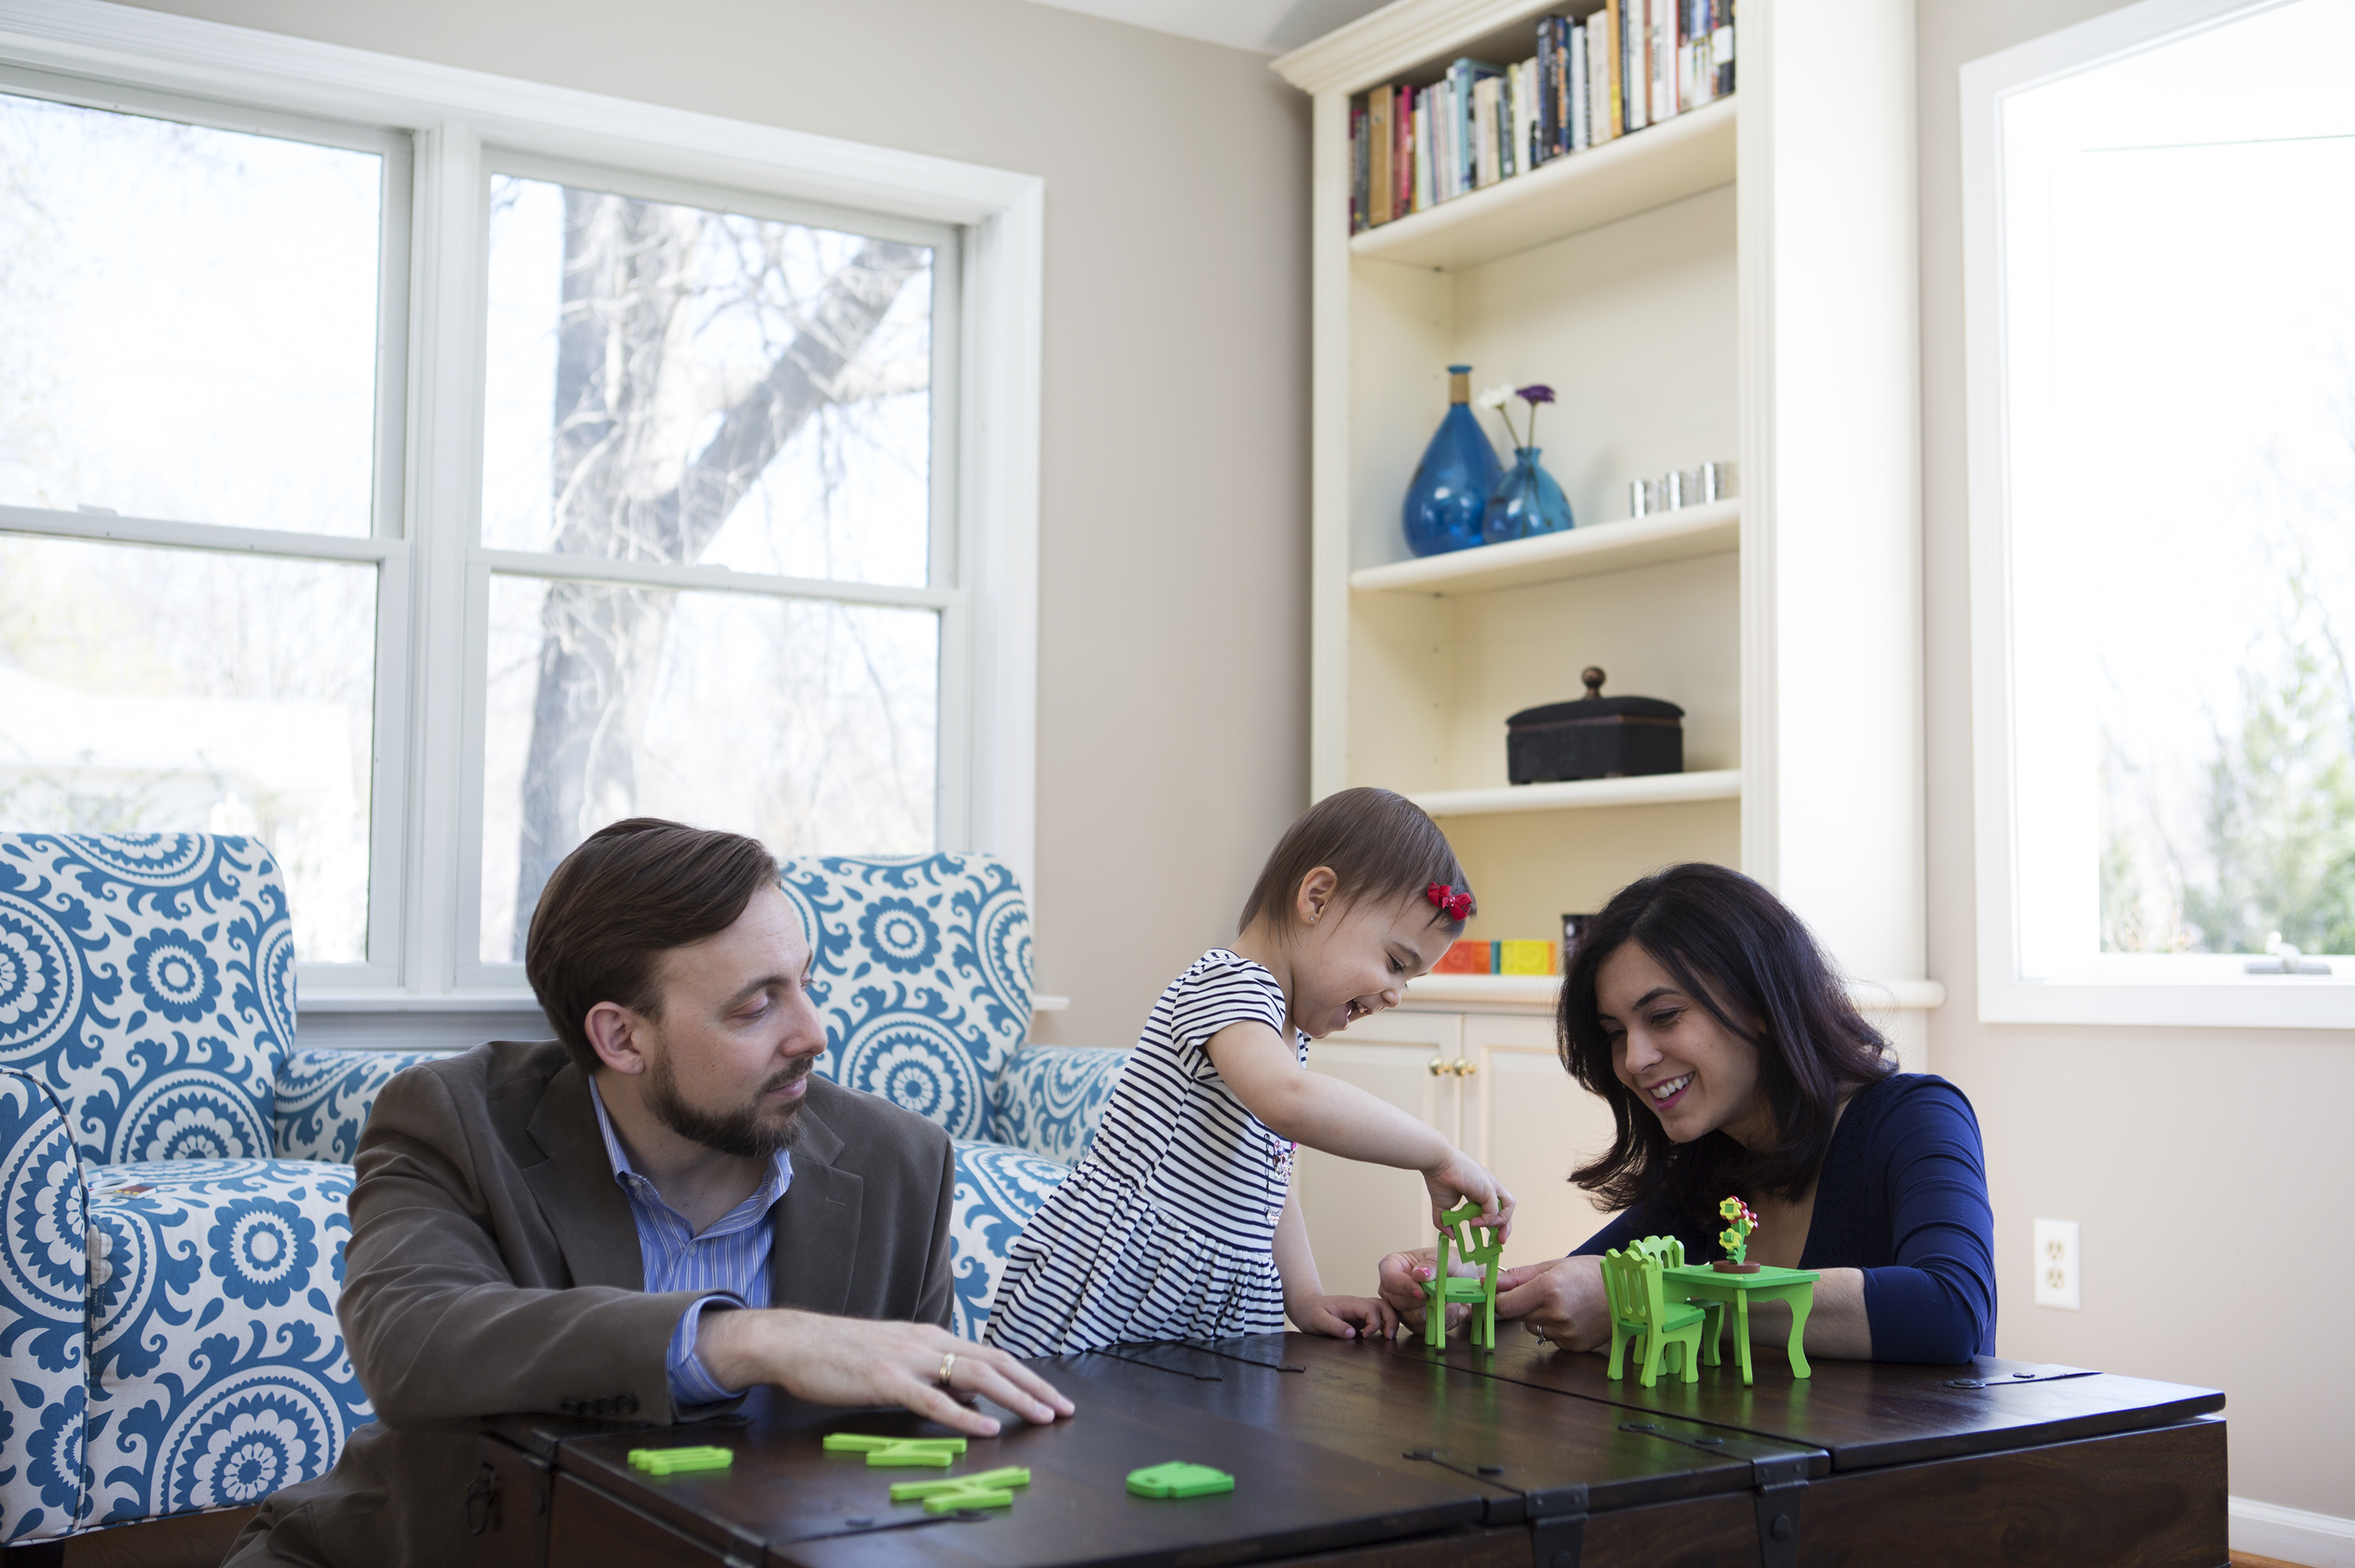 Travis and Sadiye Rieder play with Sinem in their home. They've agreed that if they want more children, they'll adopt.